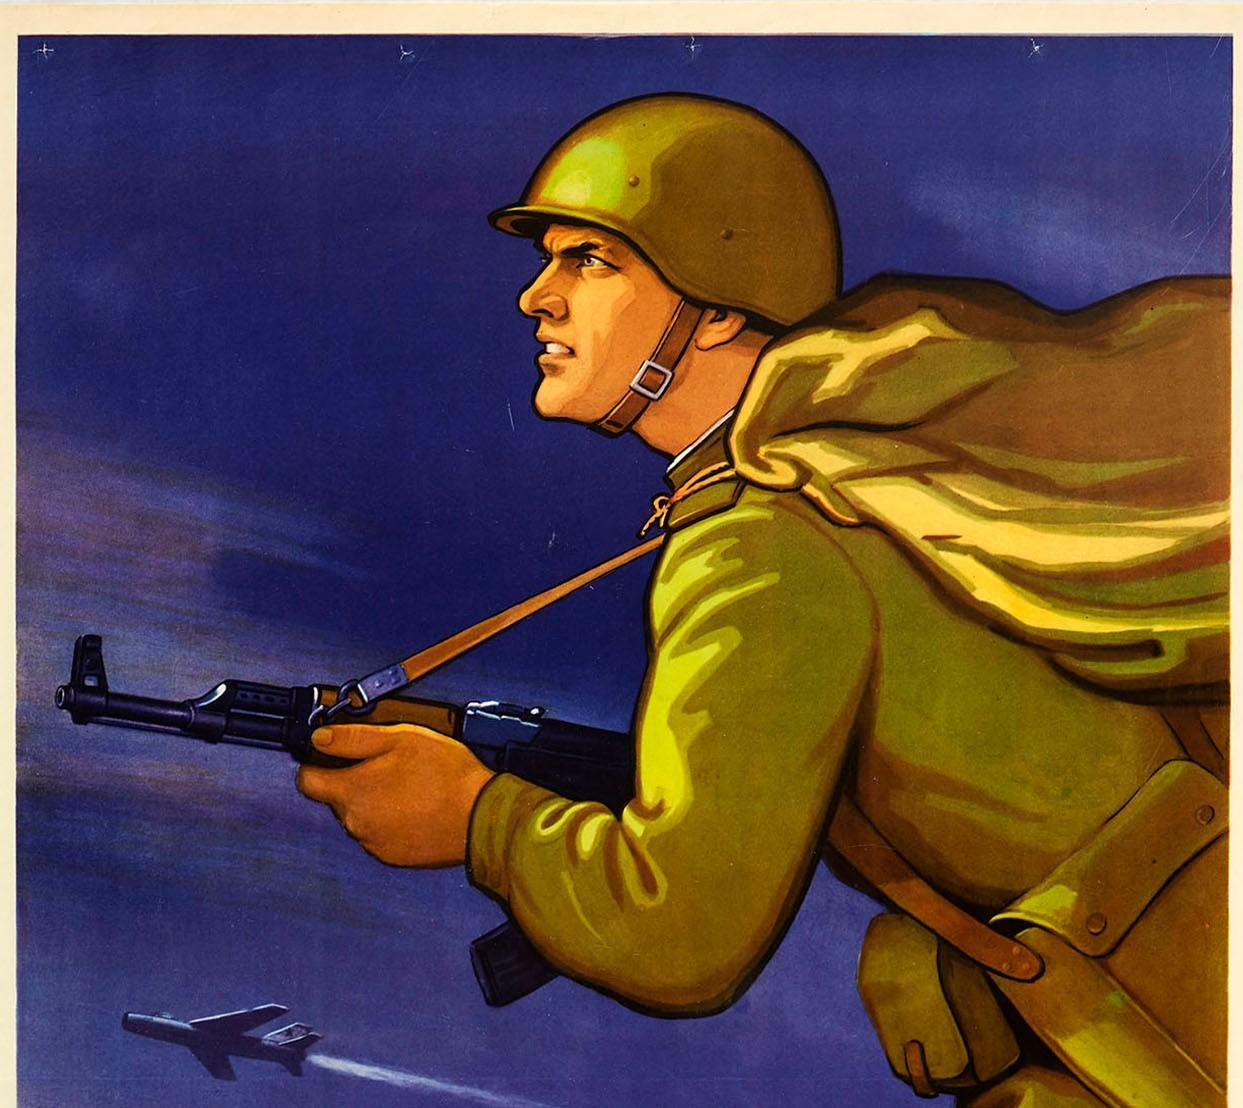 Original vintage Cold War era Soviet propaganda poster - Learn to Advance Swiftly and Bravely! Dynamic artwork showing an infantry soldier in uniform holding his Kalashnikov automatic rifle gun and striding into battle in the foreground with more